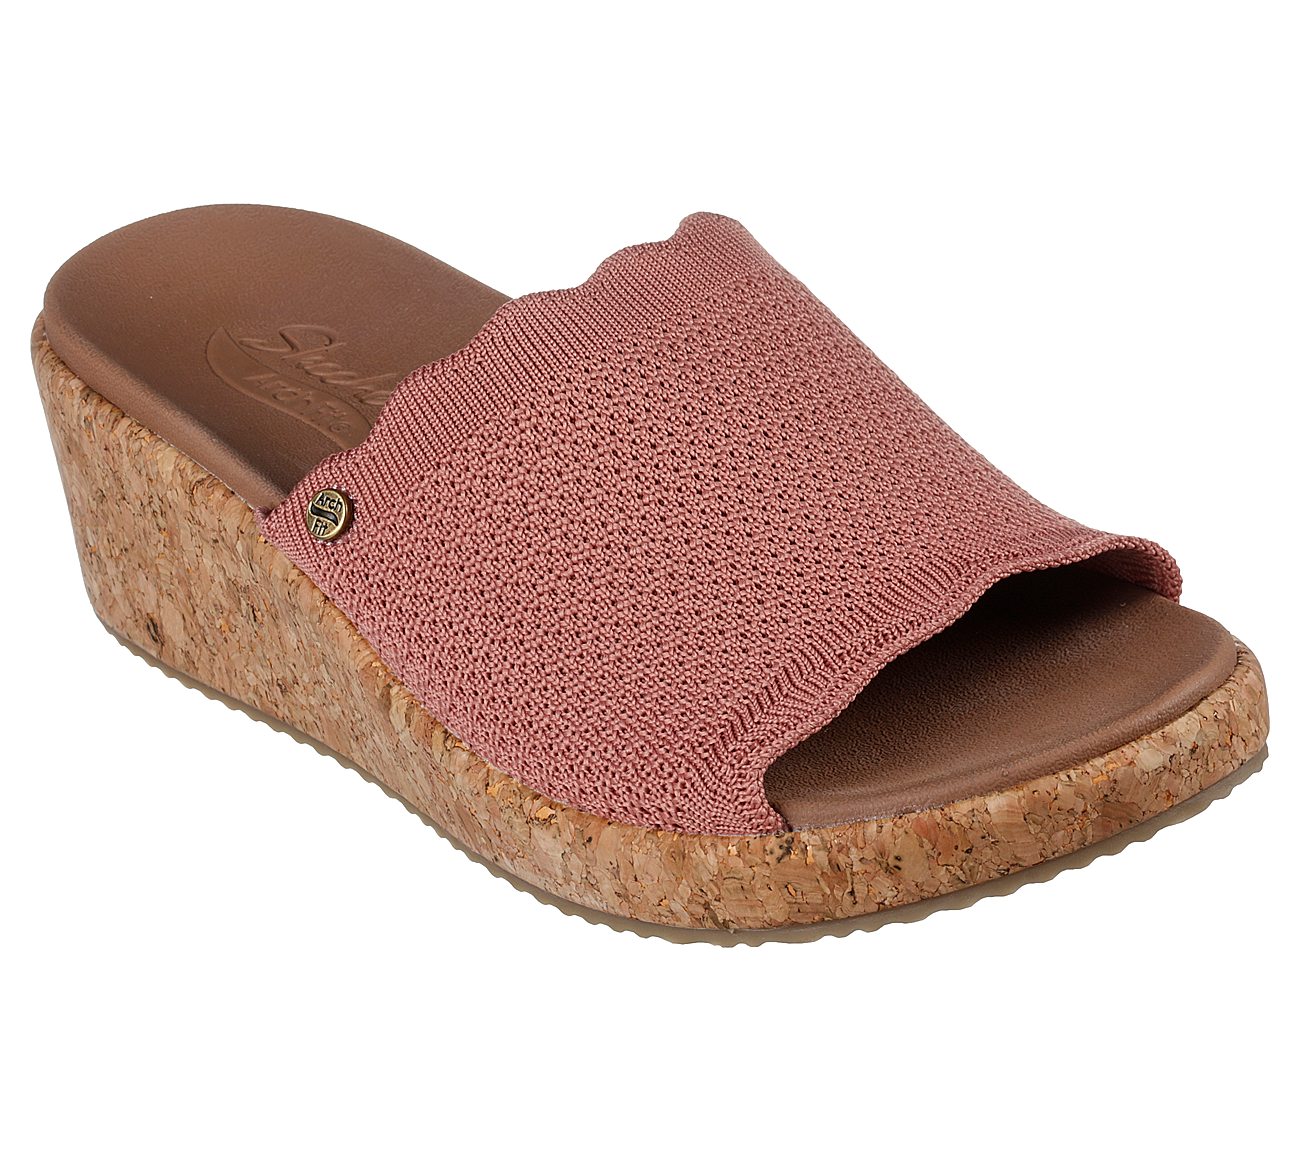 ARCH FIT BEVERLEE - JEMMA, ROSE Footwear Lateral View